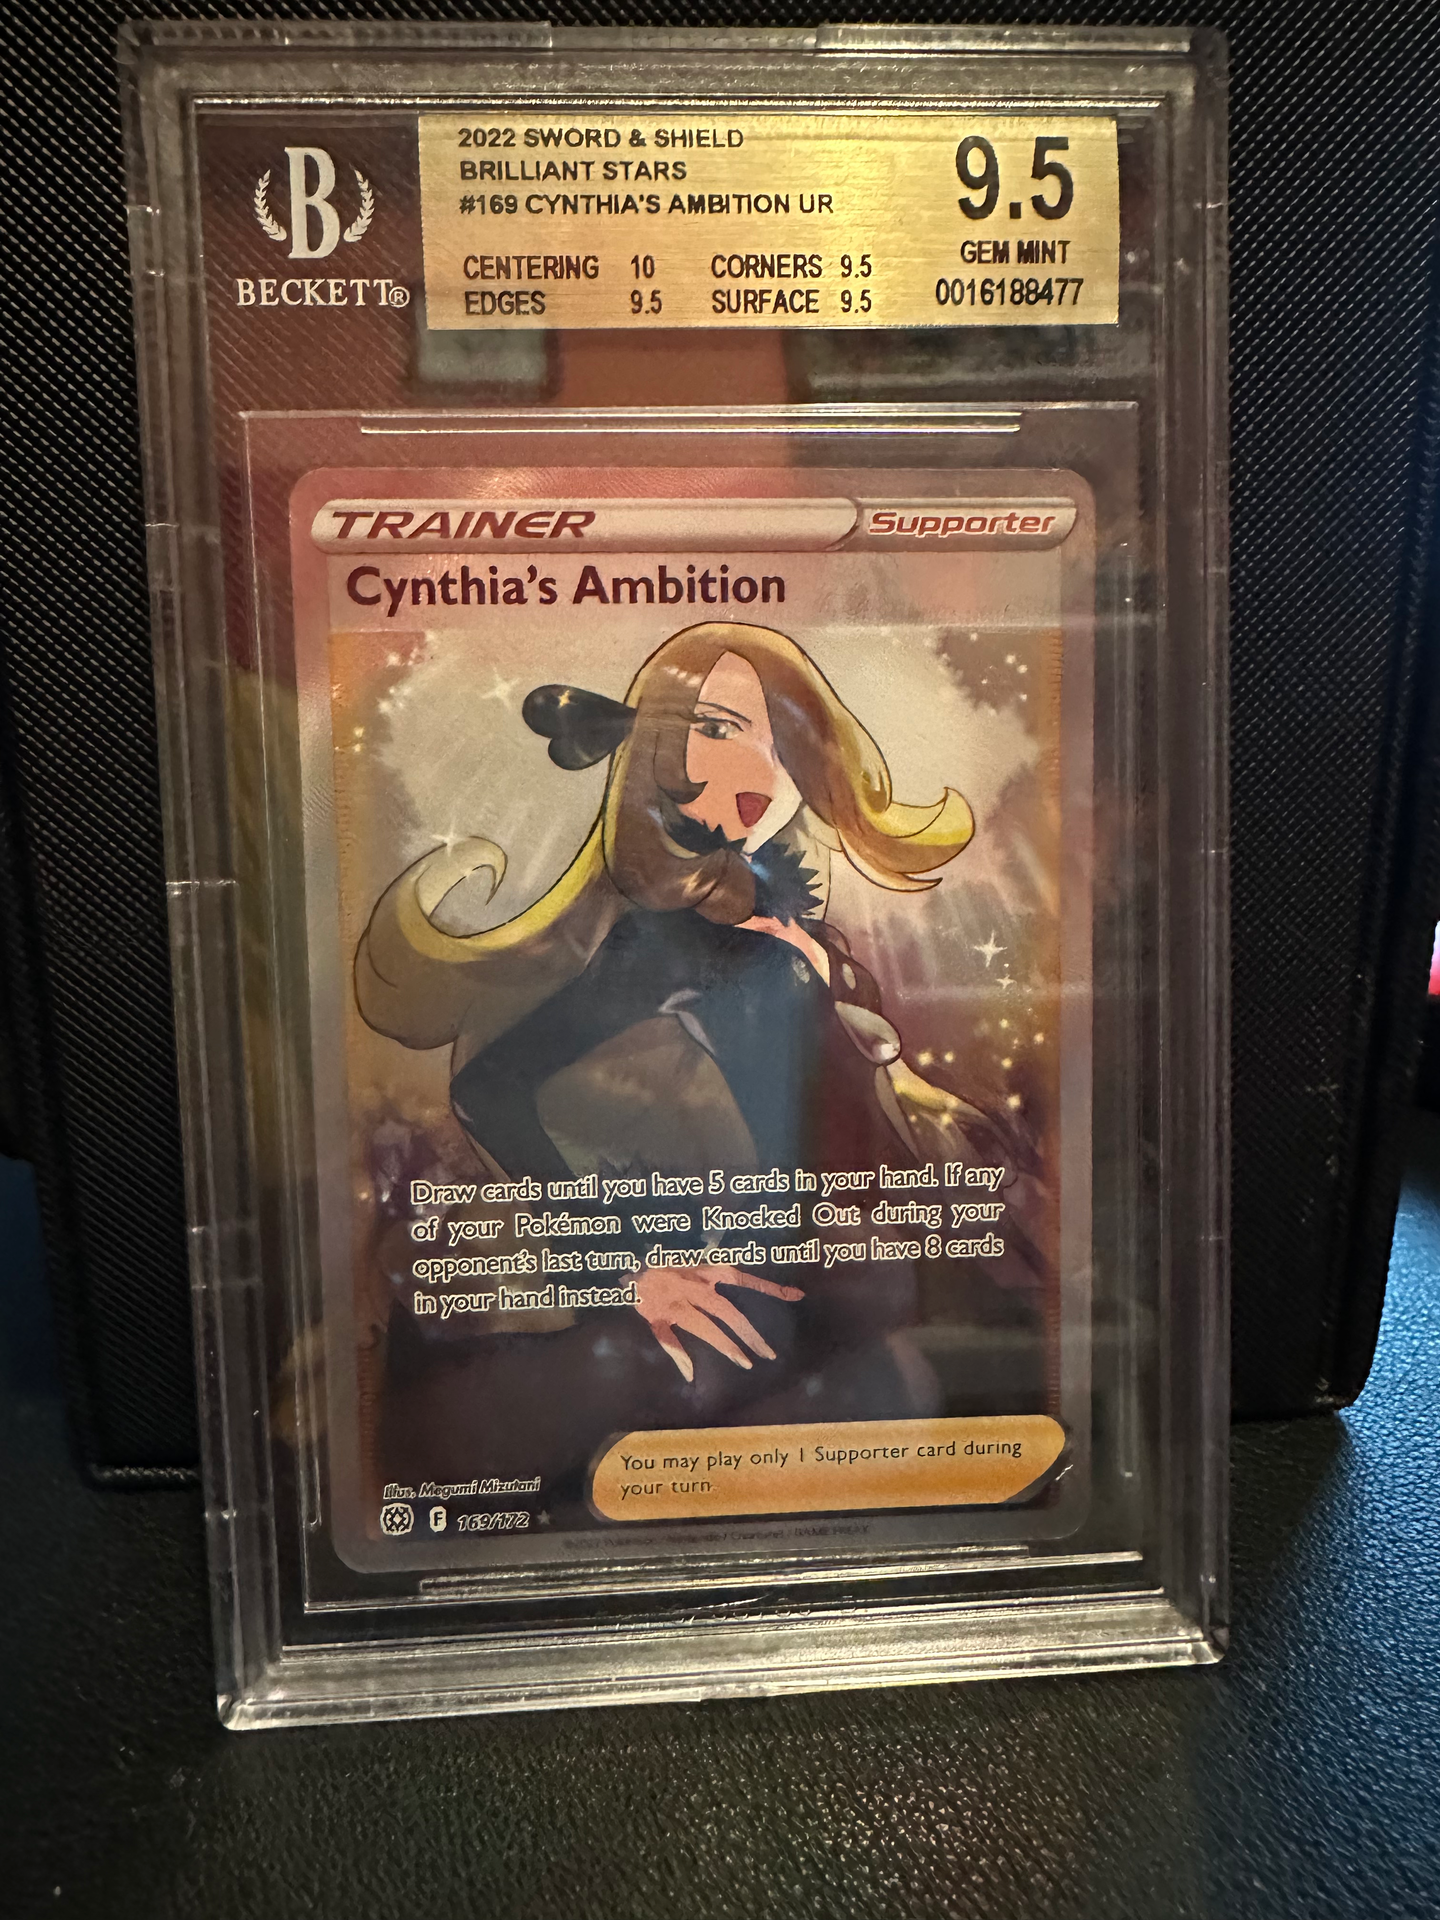 BGS 9.5 Cynthia's Ambition Full Art Trainer (Graded Card)